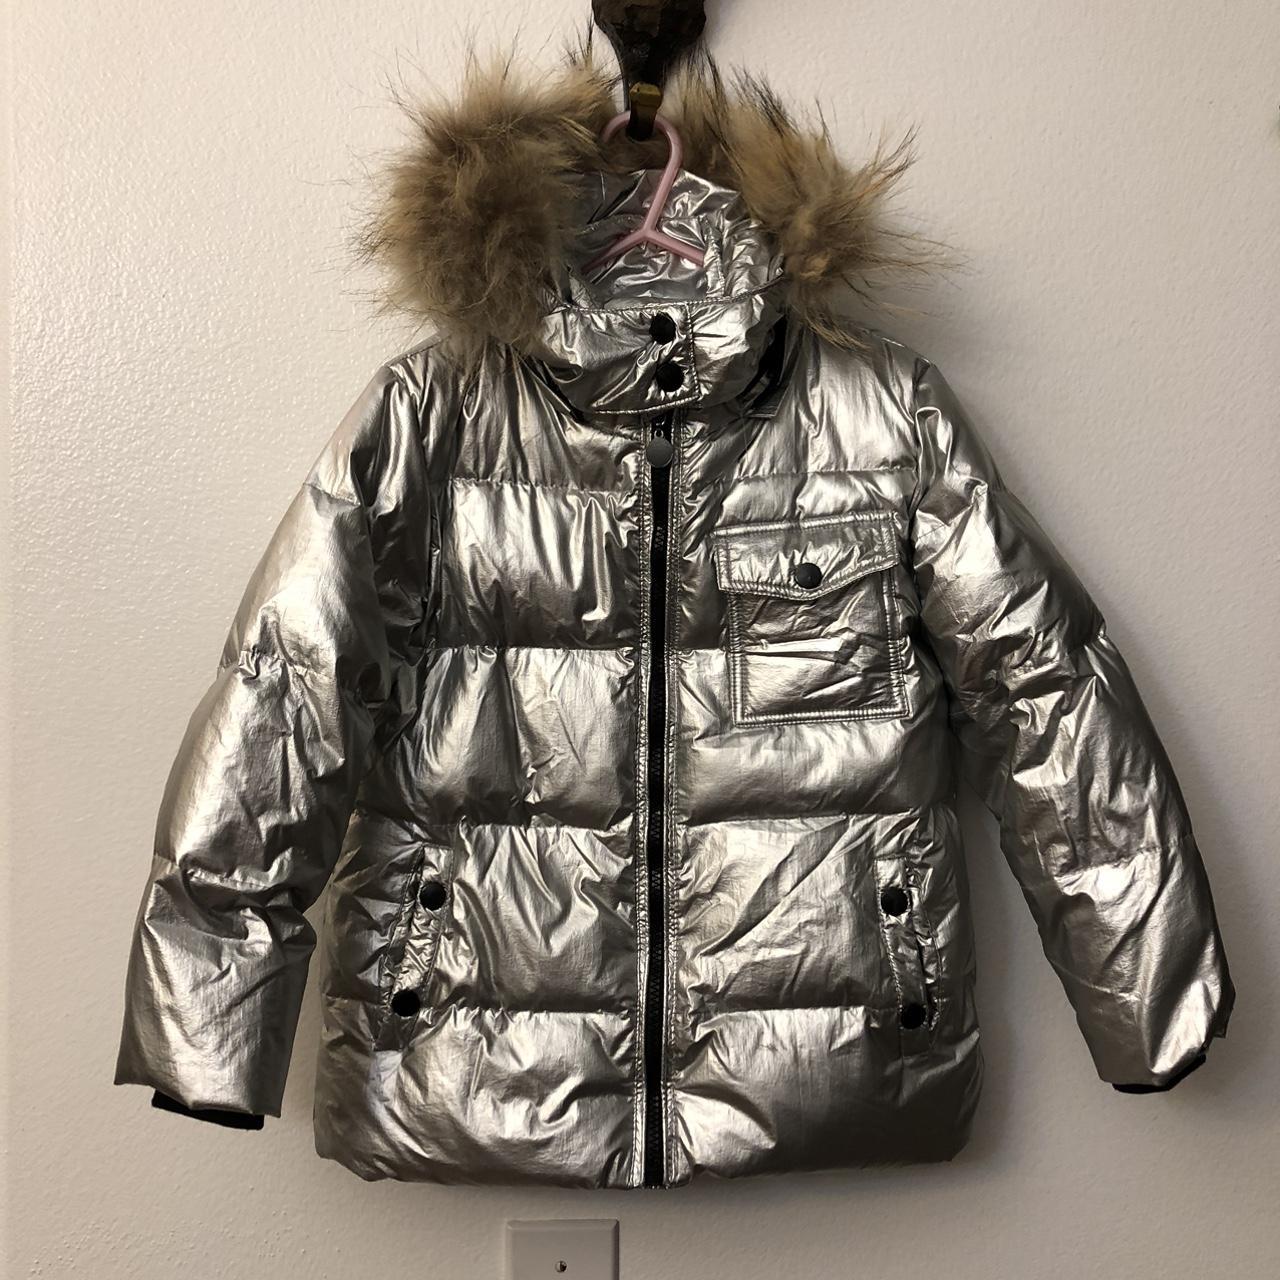 Girls' Puffer Coat with Real Fur in Silver size 110... - Depop